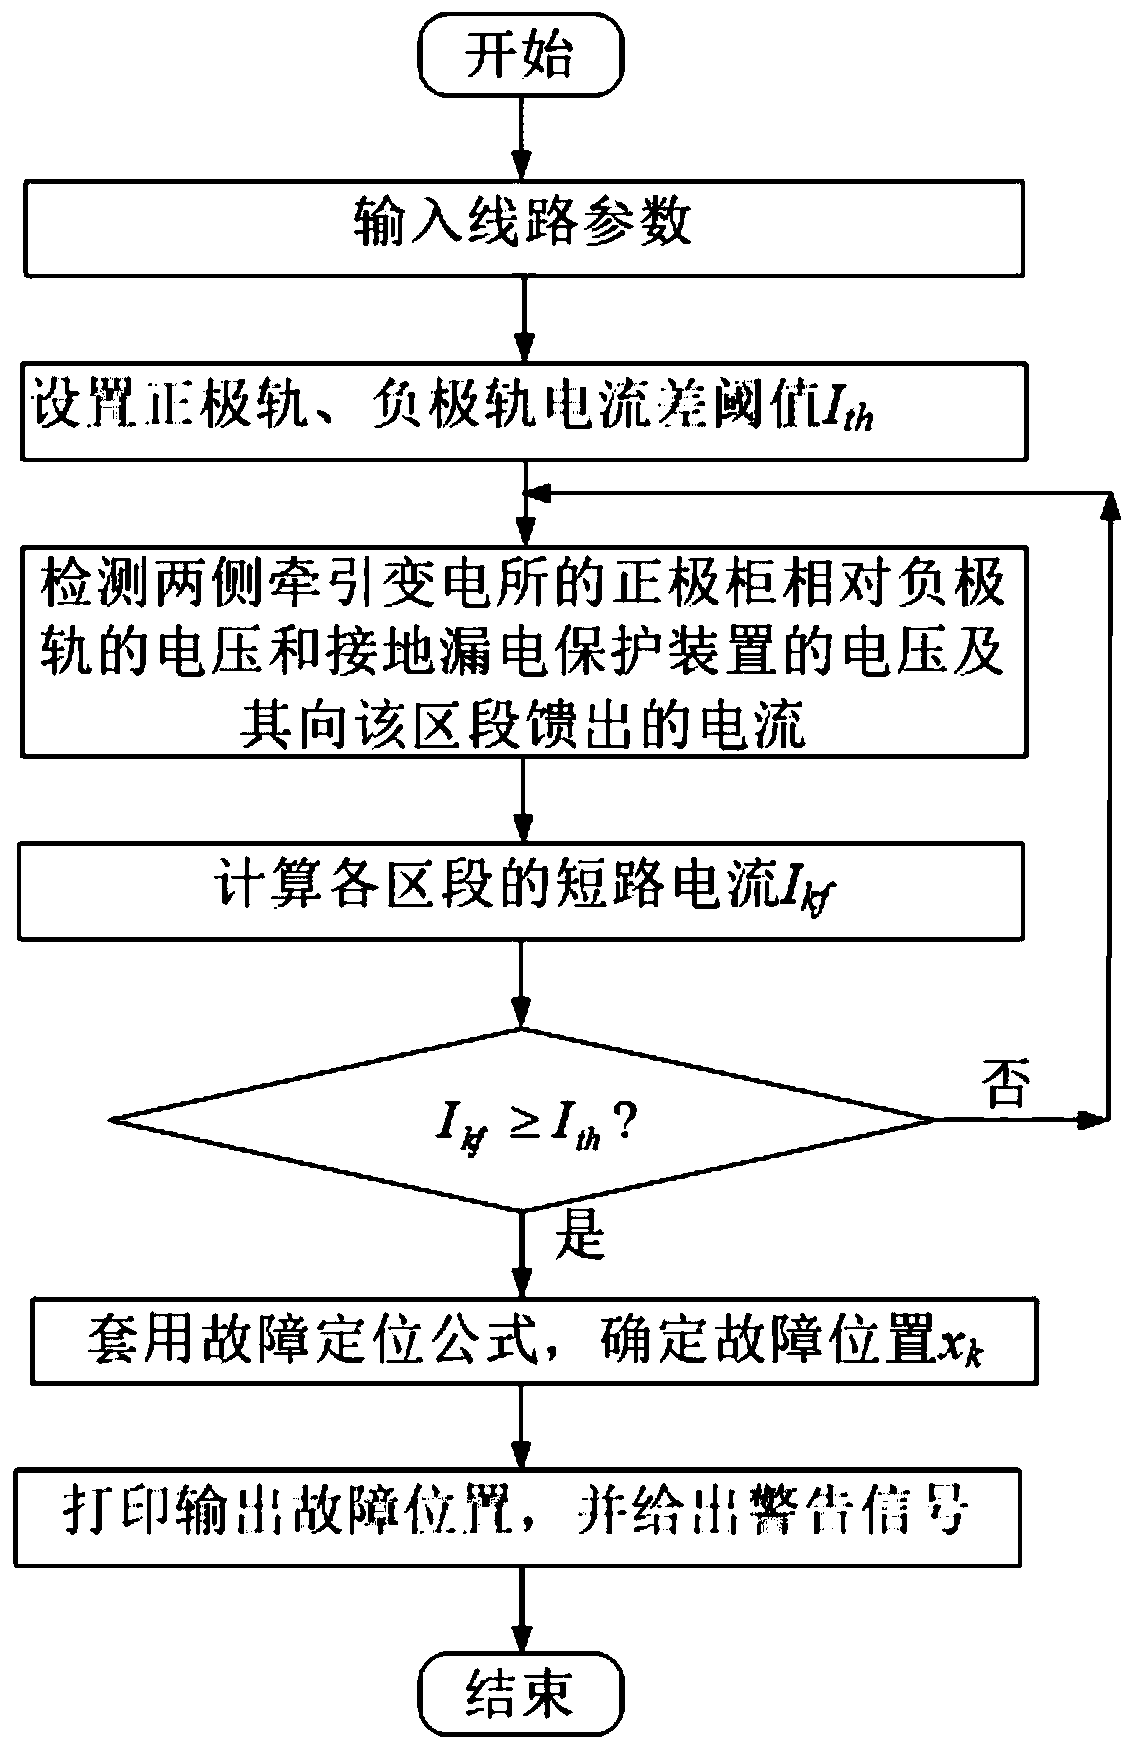 Positive rail grounding fault positioning method of fourth rail backflow traction power supply system